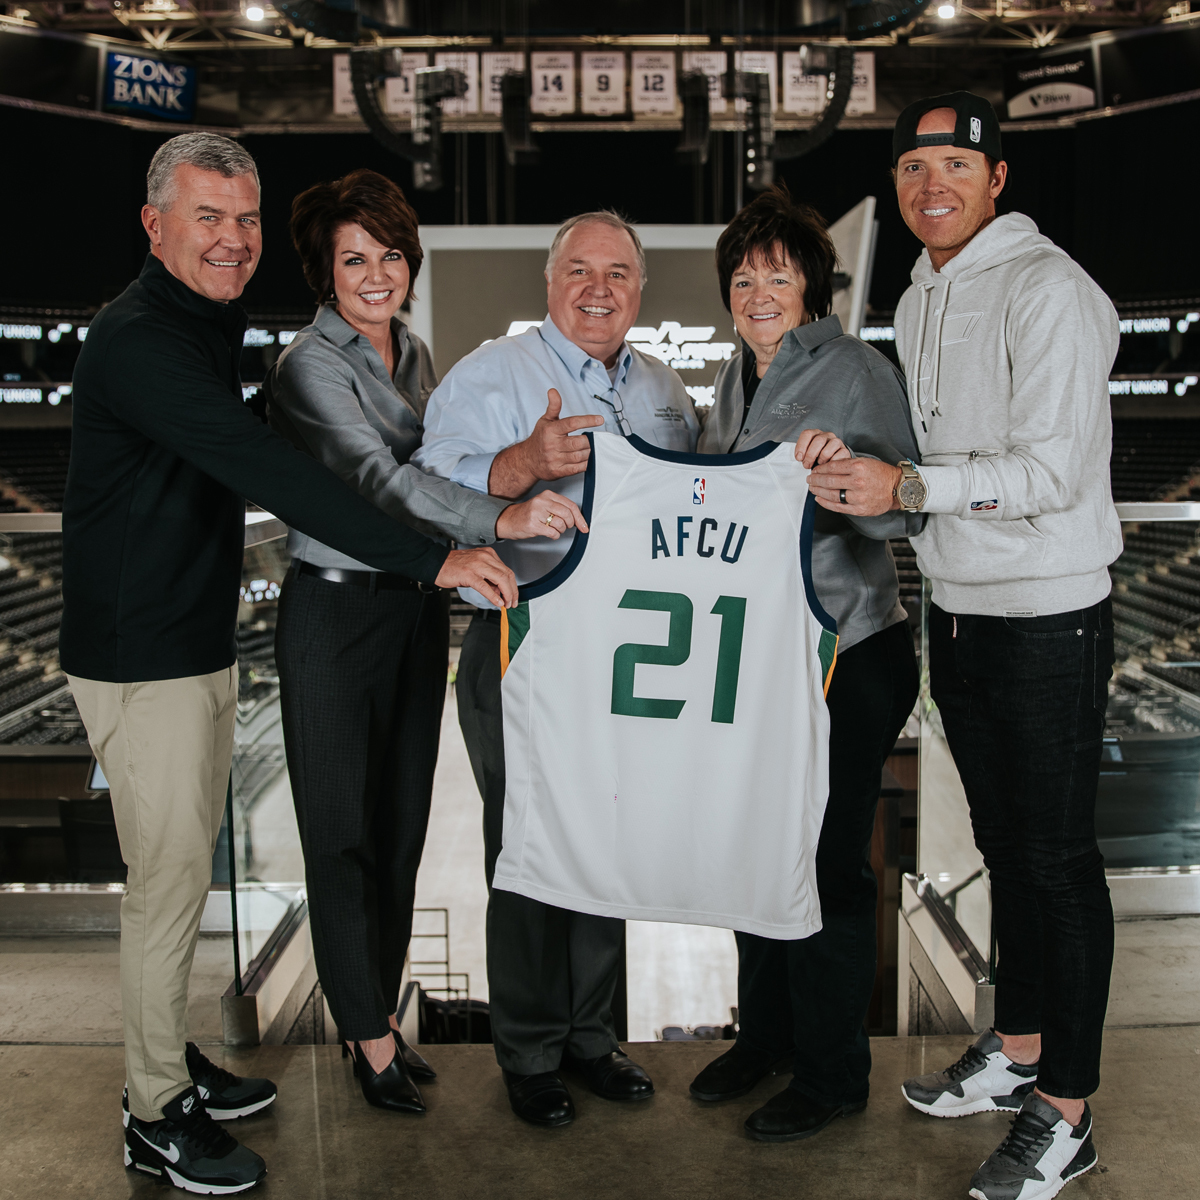 America First Credit Union Selected as Exclusive Corporate Partner of the Utah Jazz